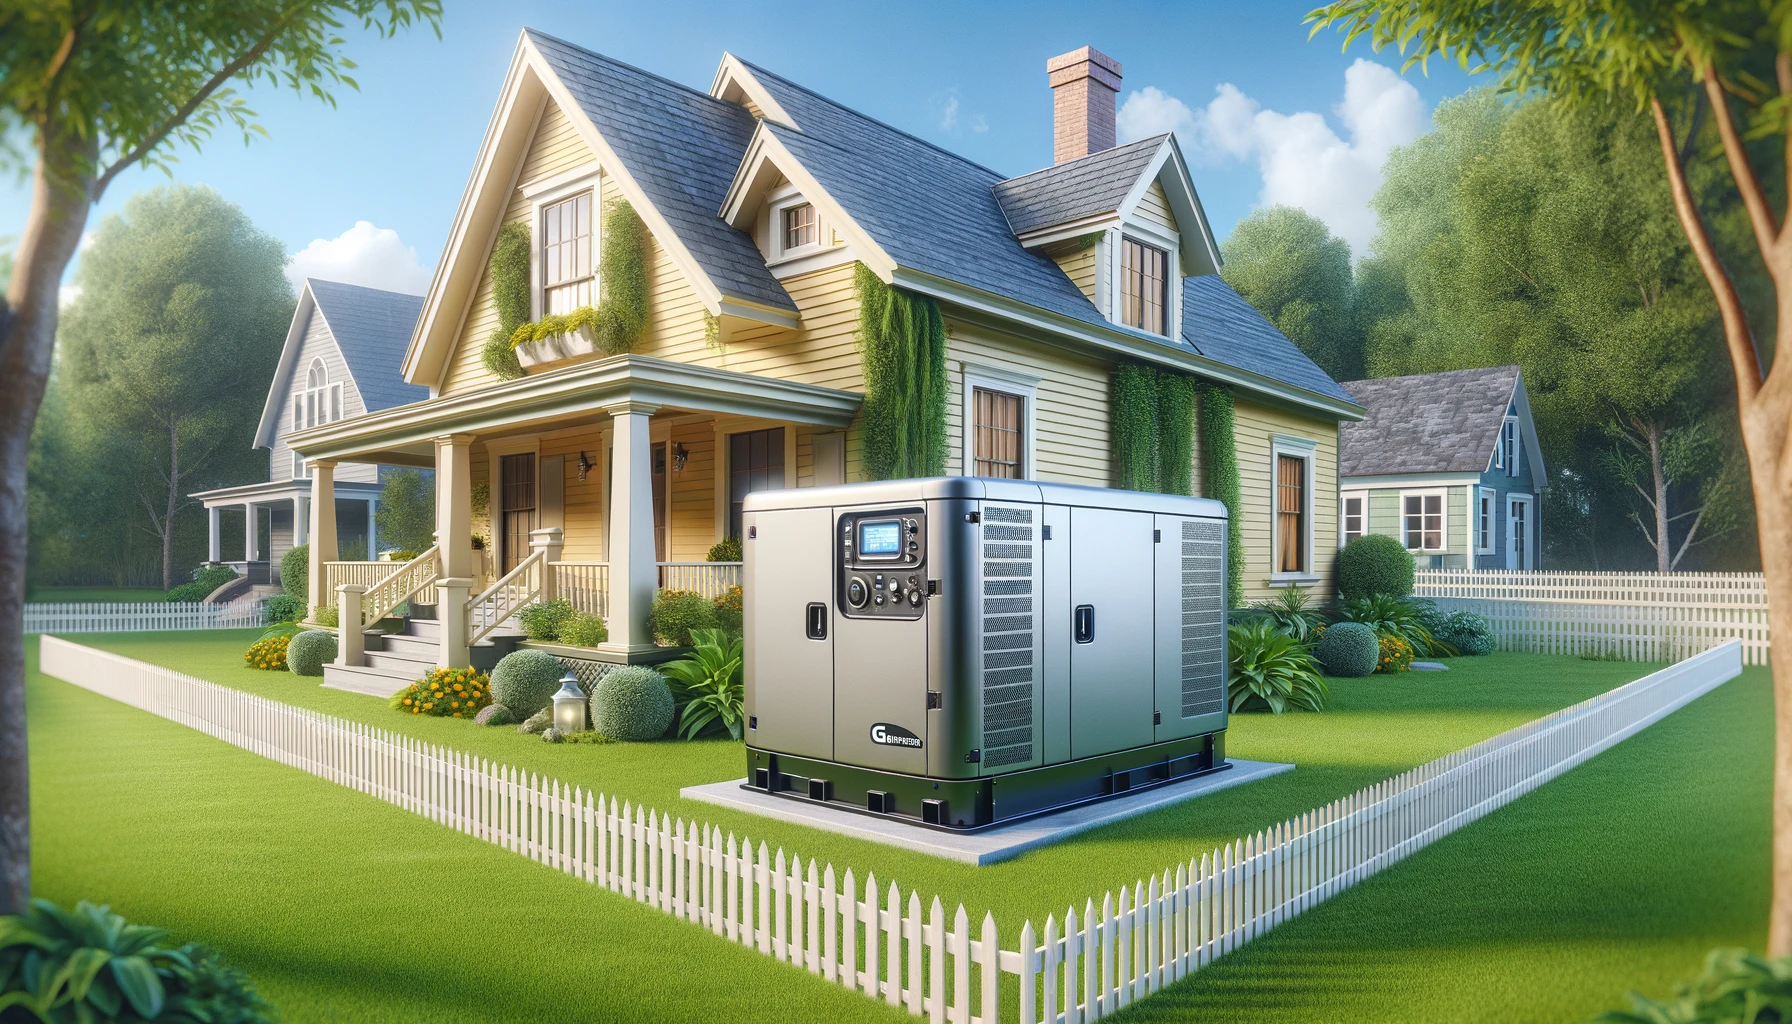 What Size of Back-up Generator Do I Need?